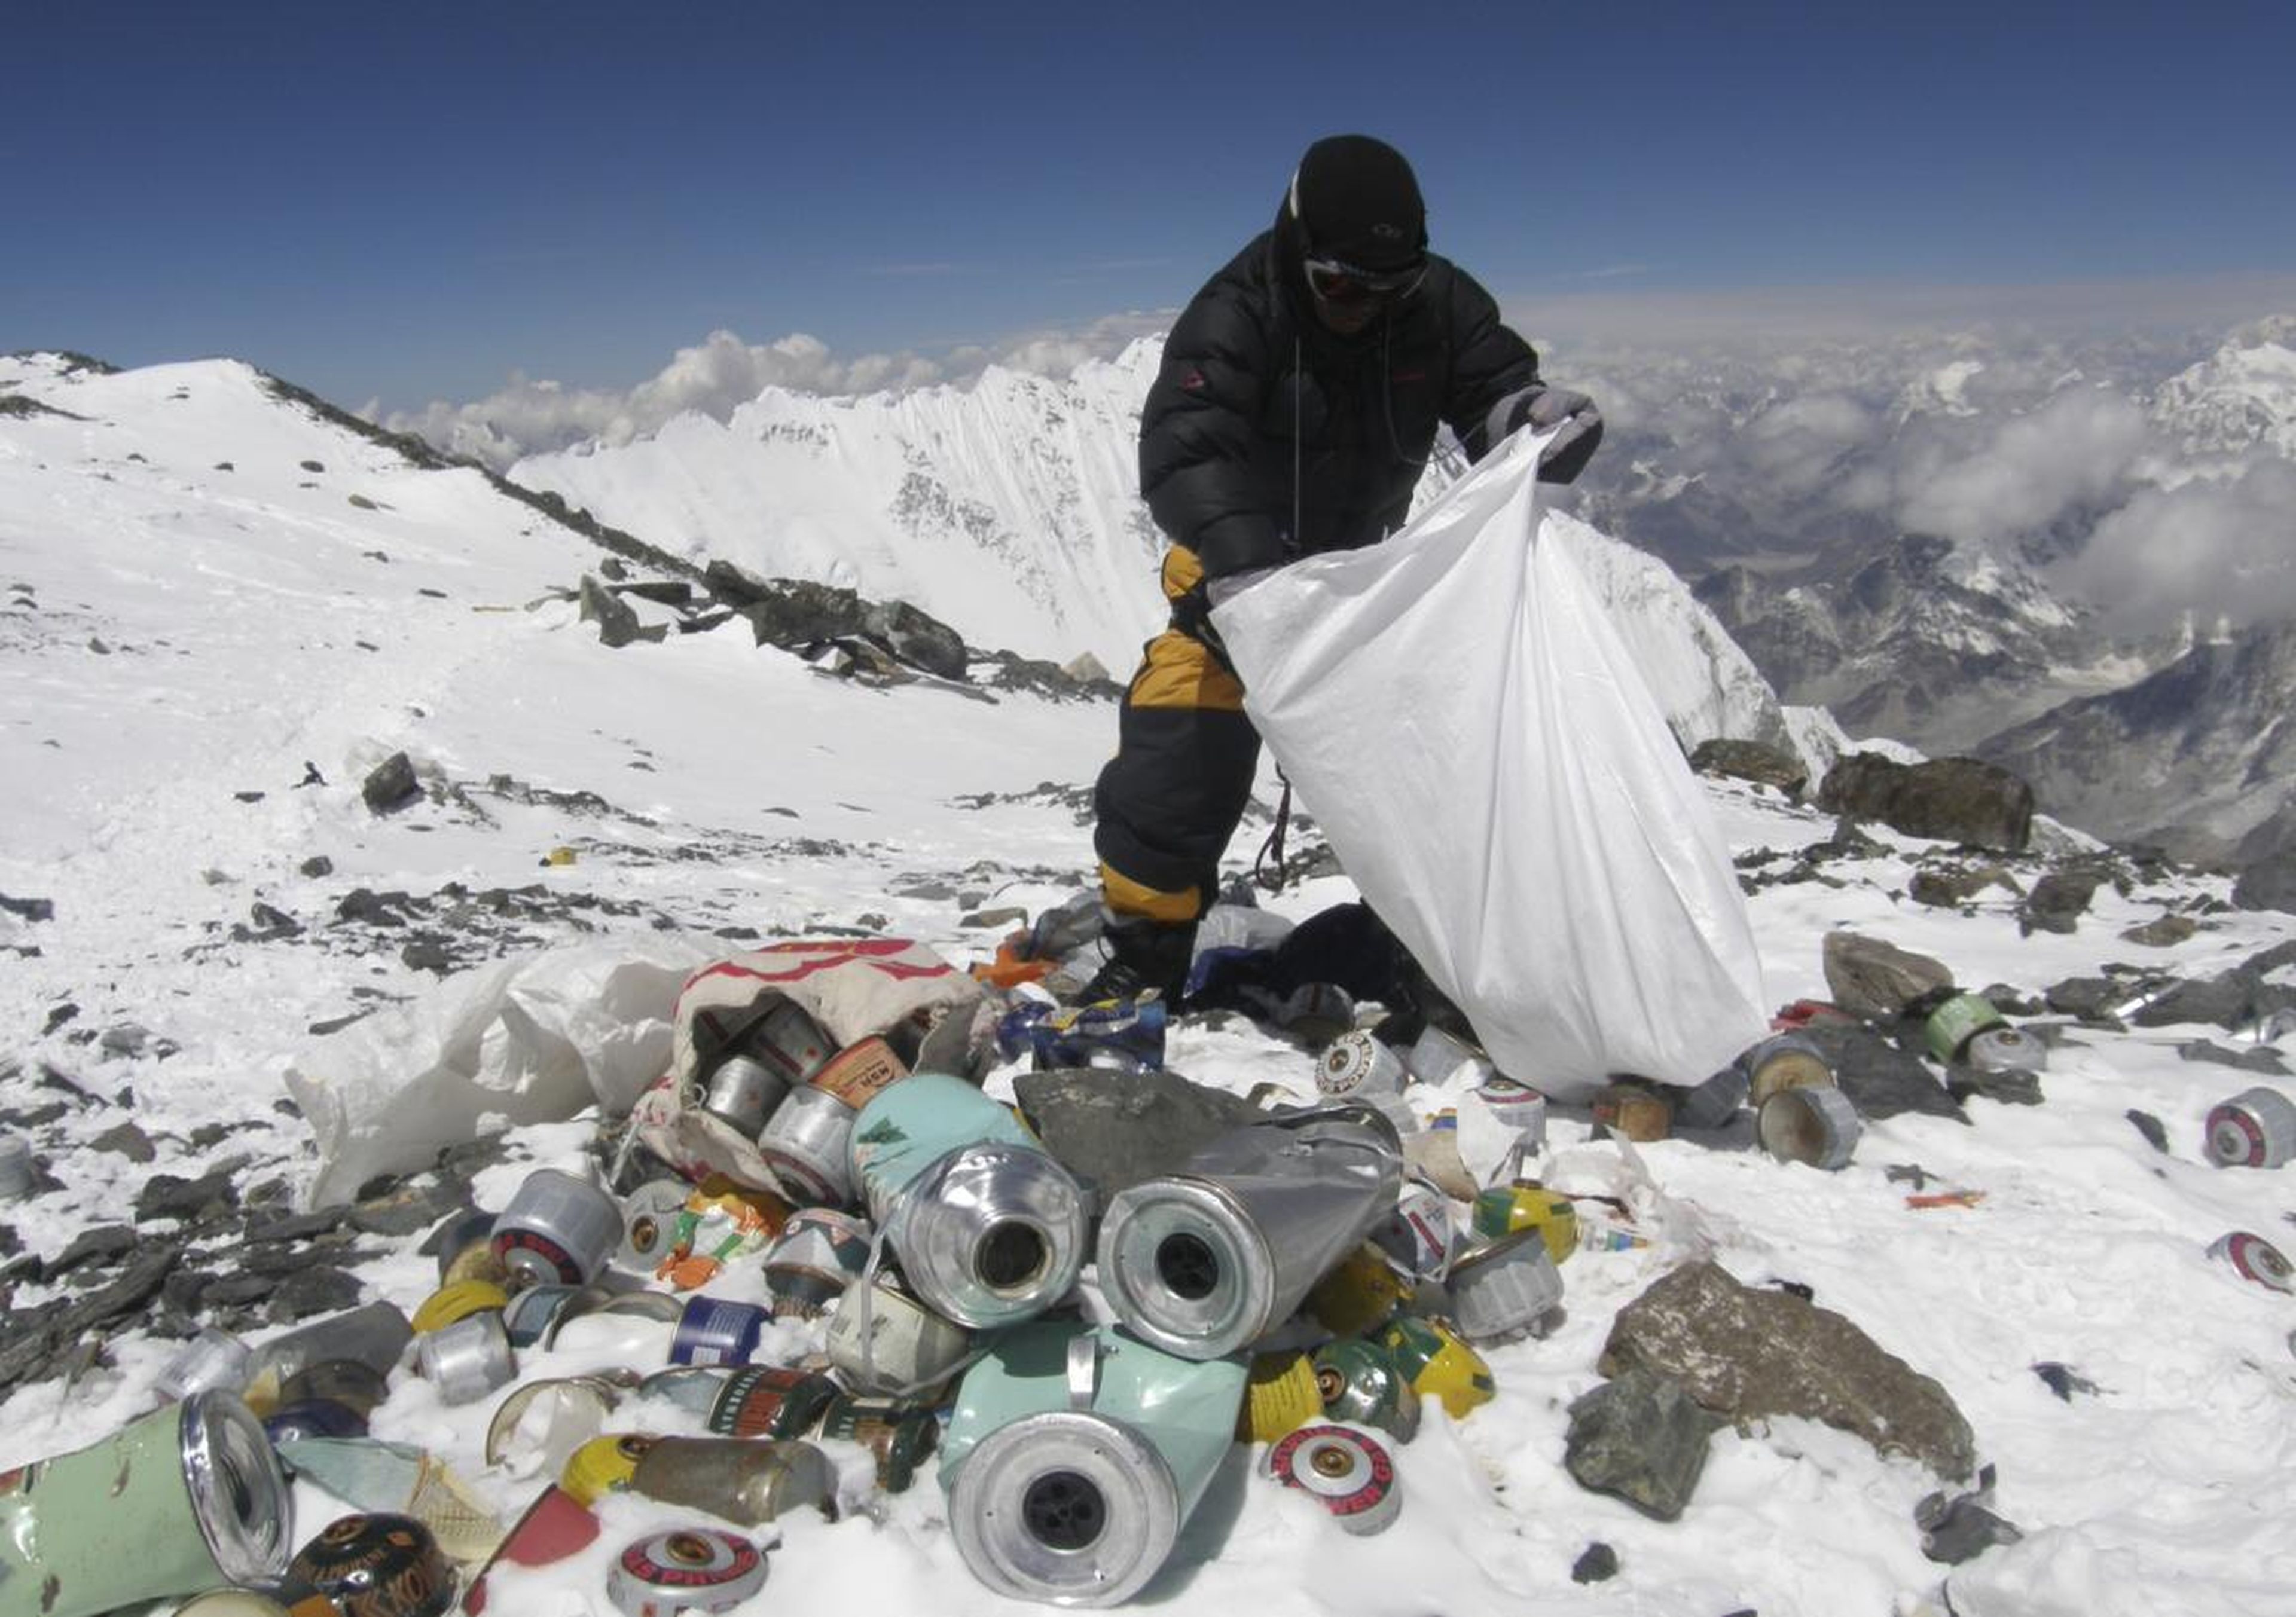 A Nepalese Sherpa collecting garbage, left by climbers, at an altitude of 8,000 meters, in May 2010.